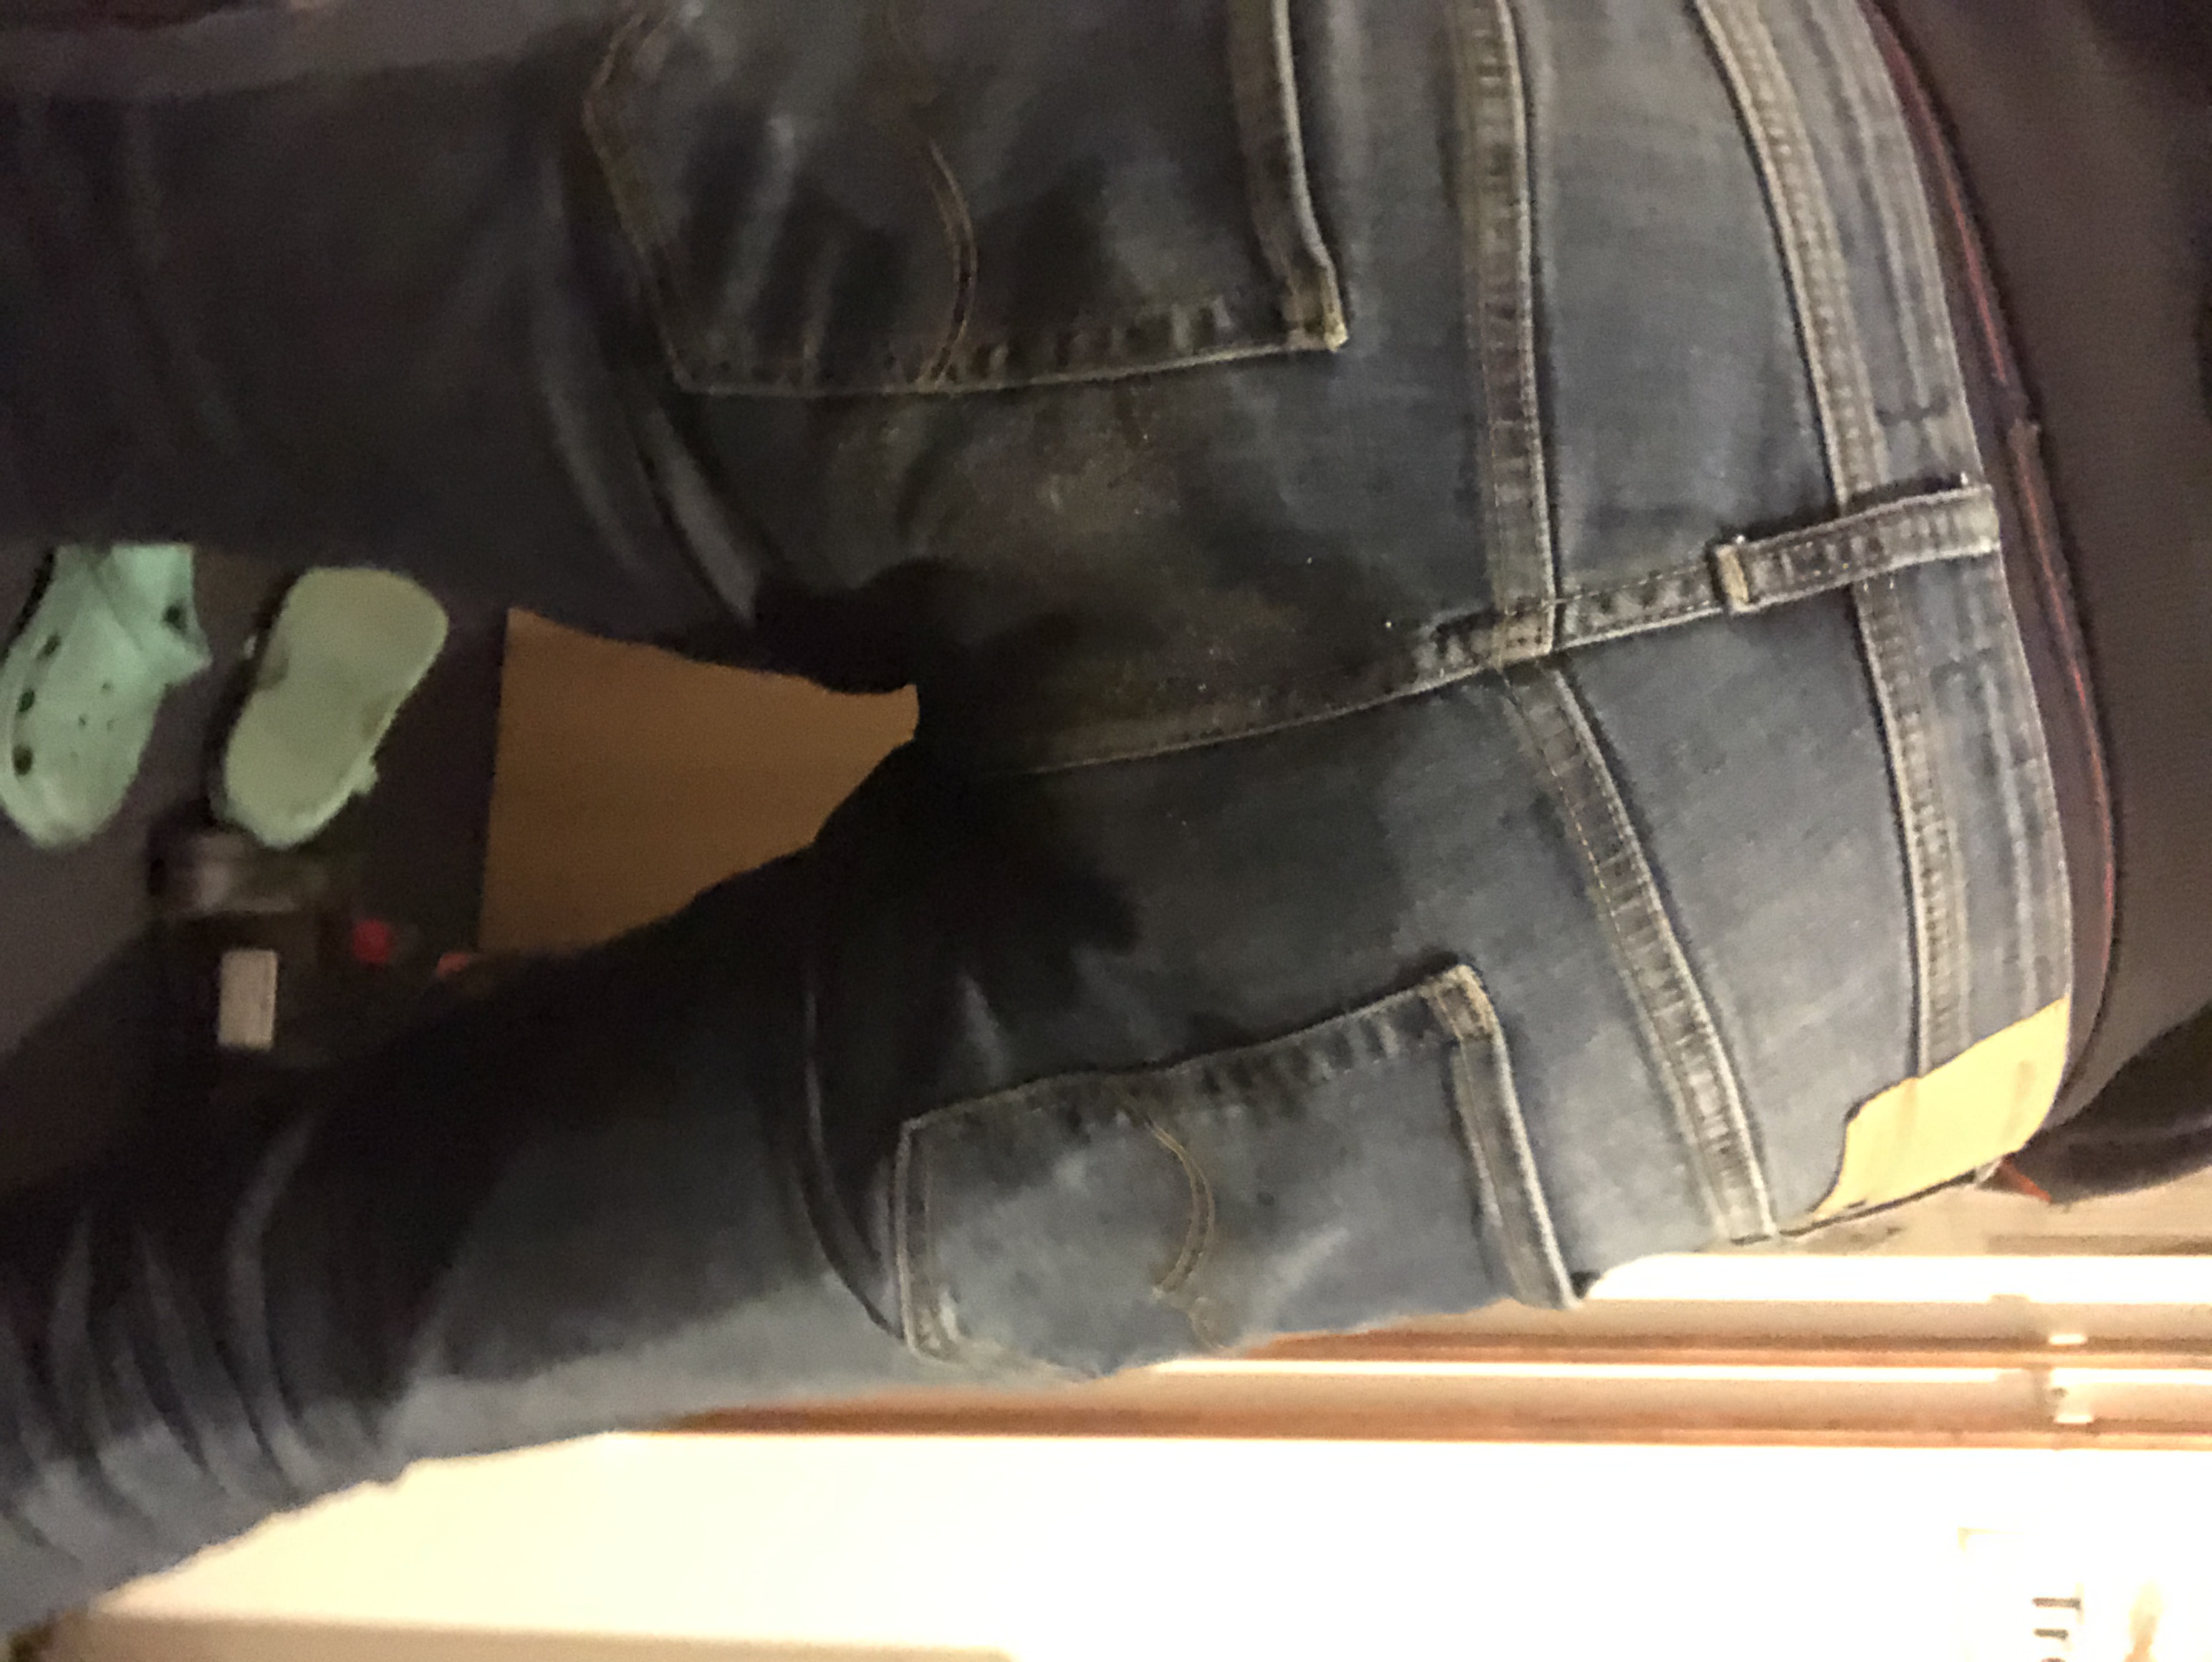 Shit and piss in my jeans